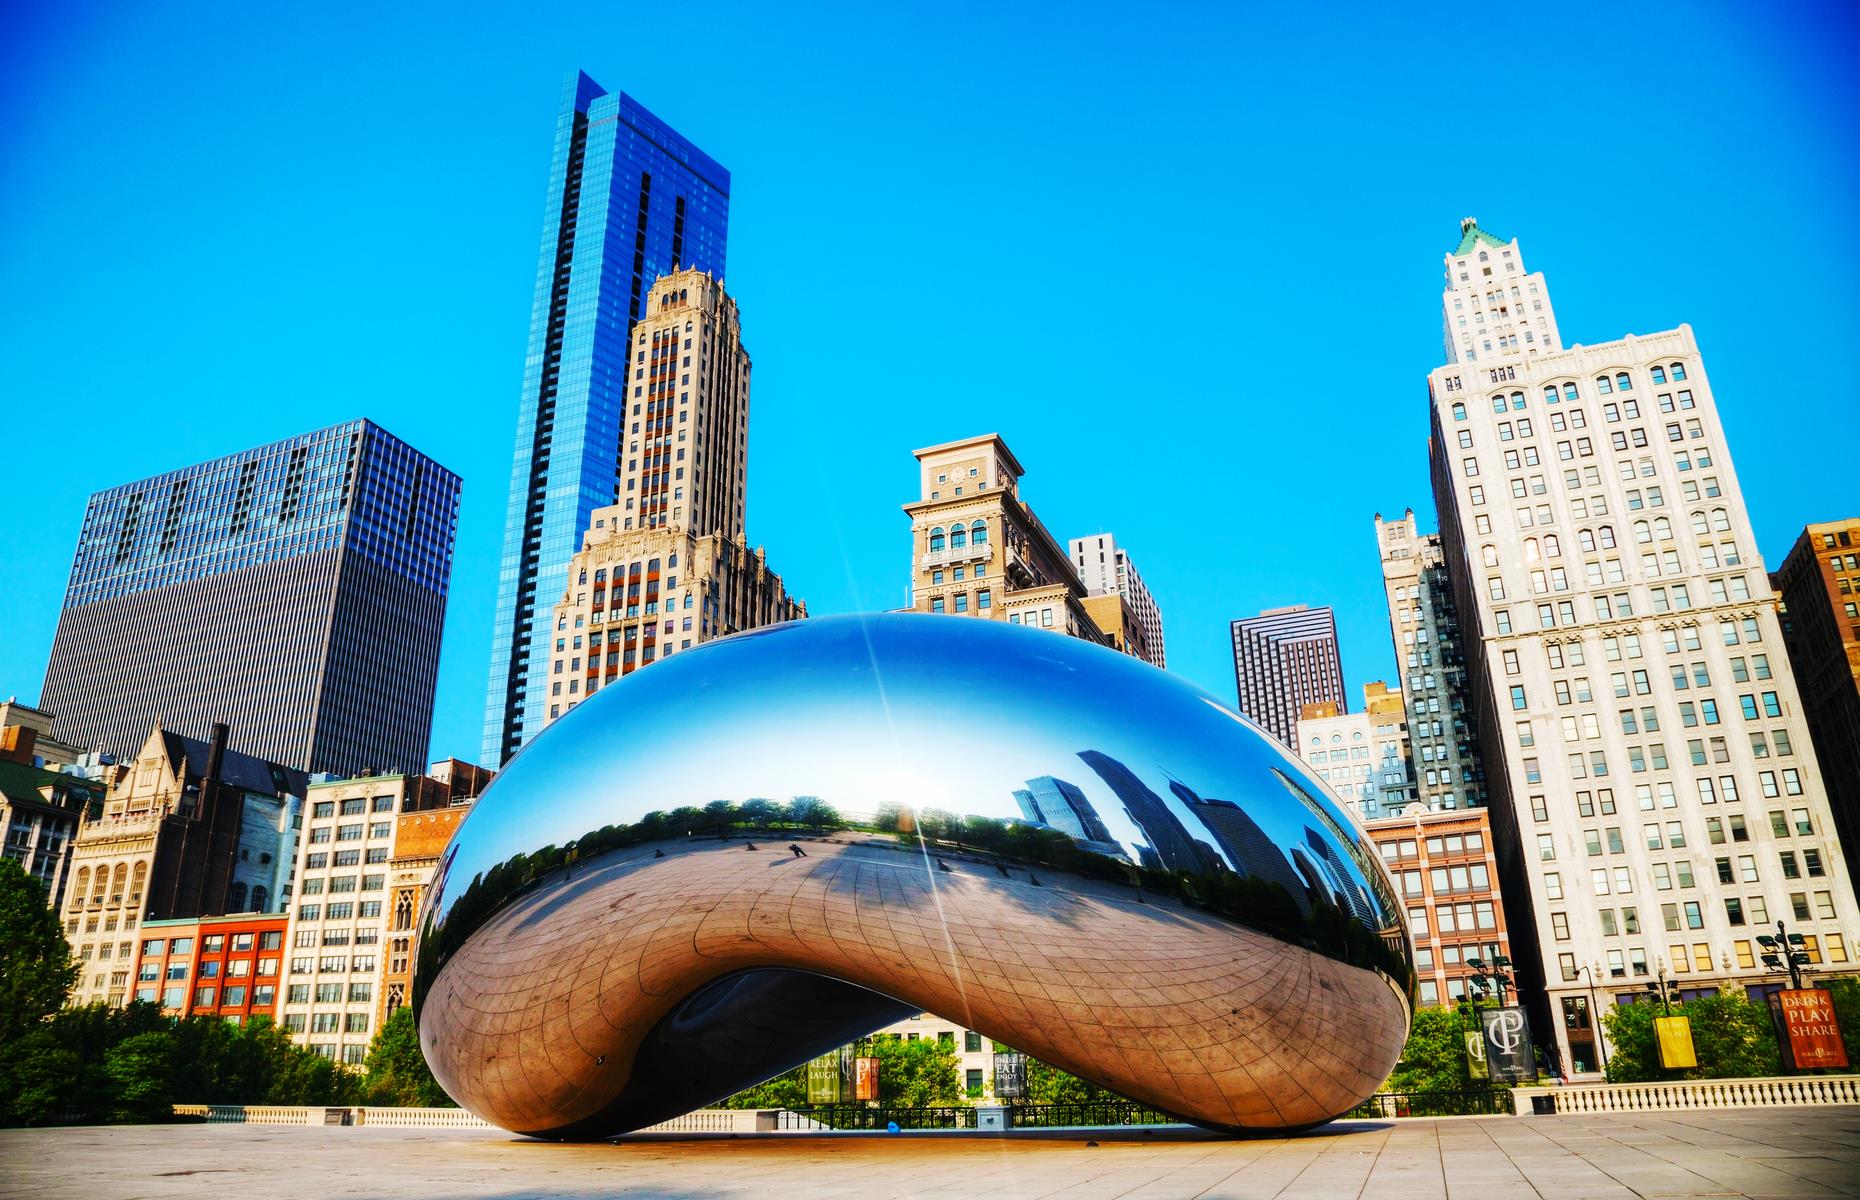 <p>Cities don’t come much more stylish than <a href="https://www.choosechicago.com/">Chicago</a>. Public art installations, including the famous Cloud Gate sculpture or "The Bean”, have become as integral to the landscape as the Art Deco skyscrapers, water views and deep-dish pizza.</p>